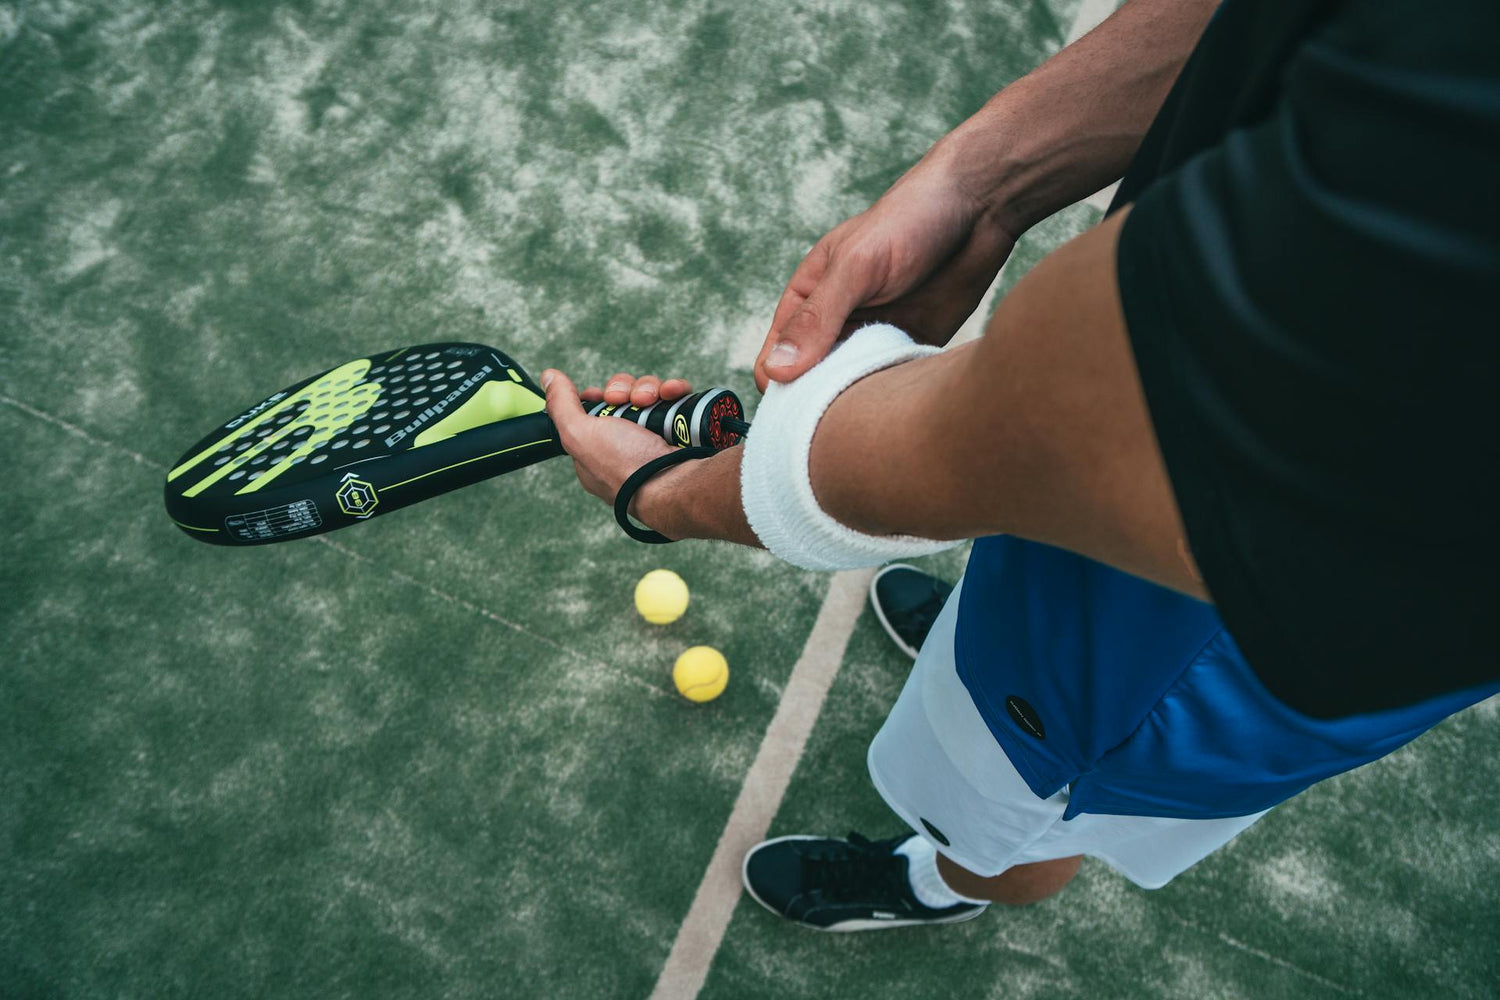 How To Self-Massage for Tennis Elbow: 6 Tips for Relief